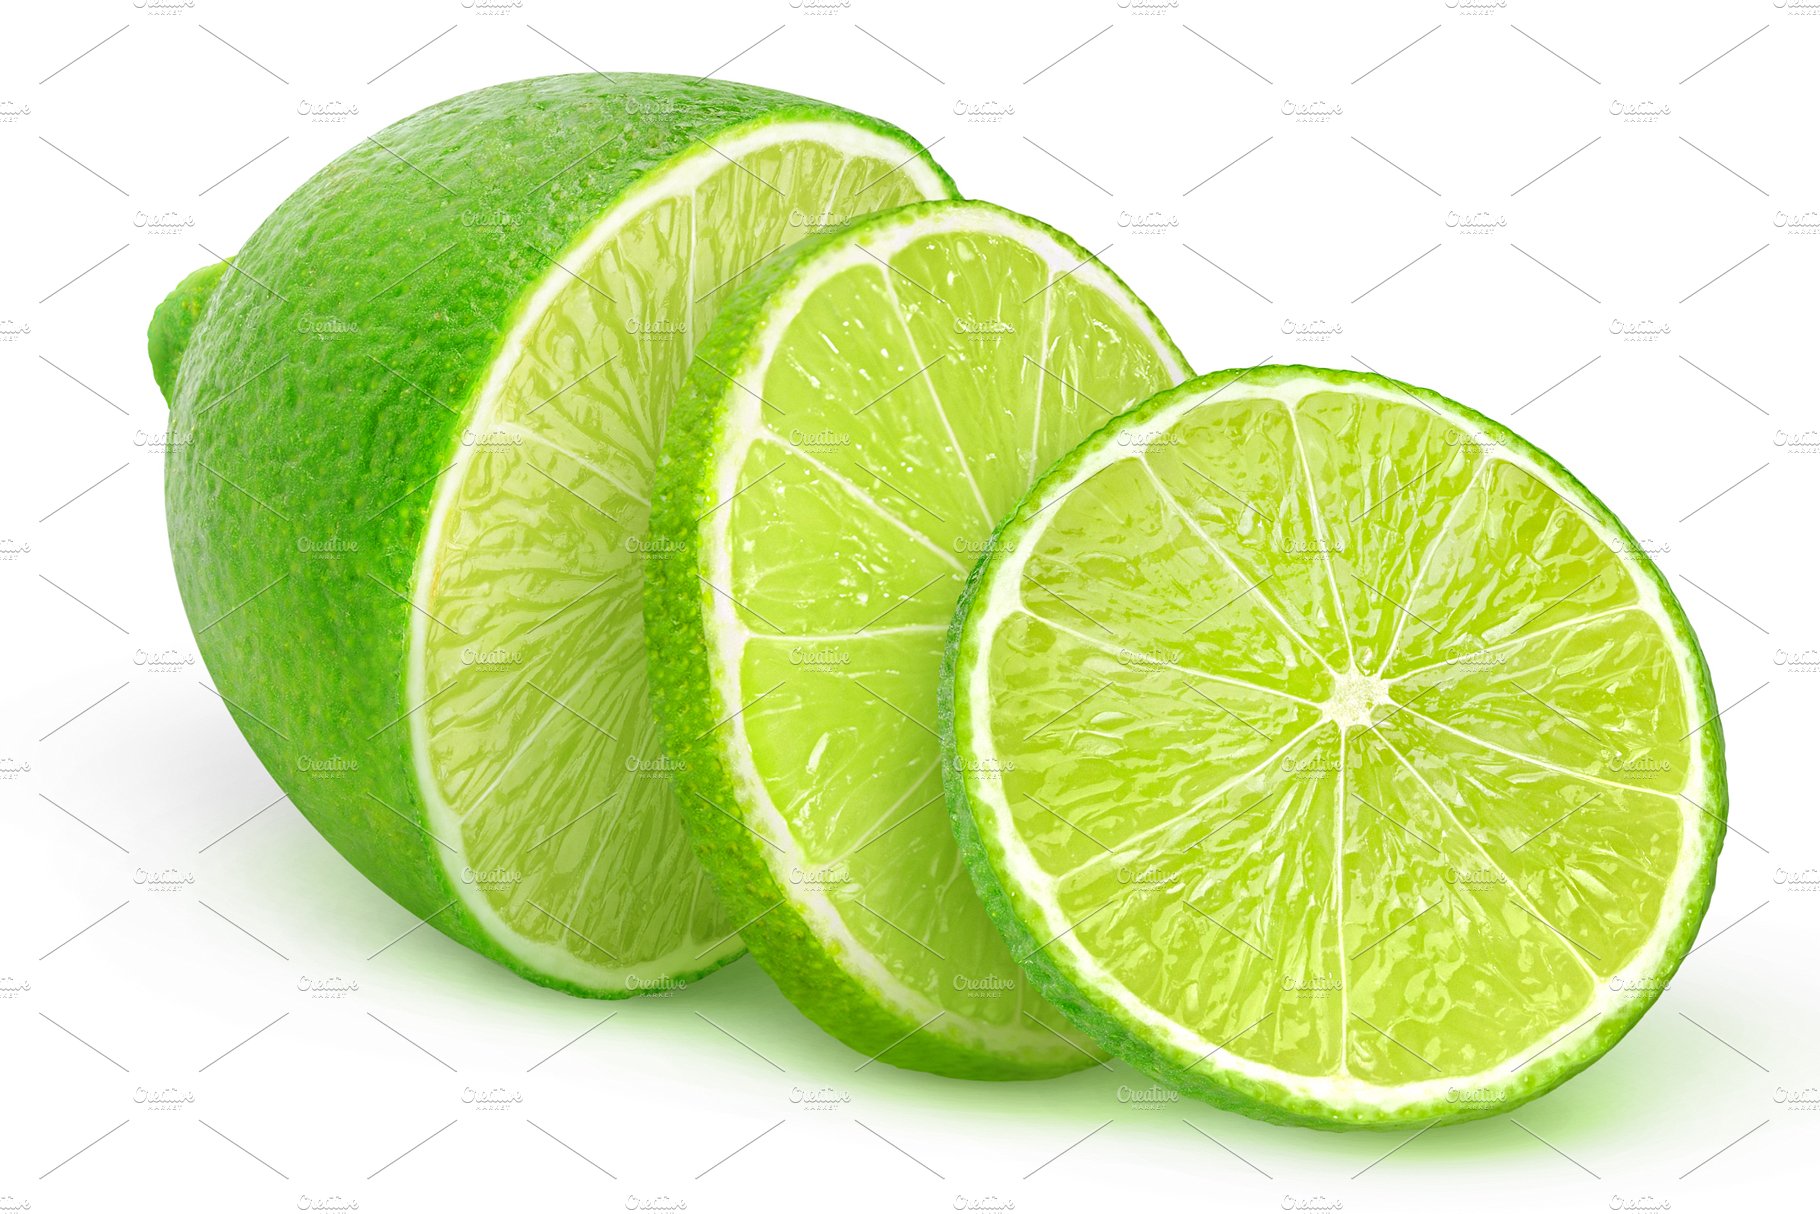 Sliced lime cover image.